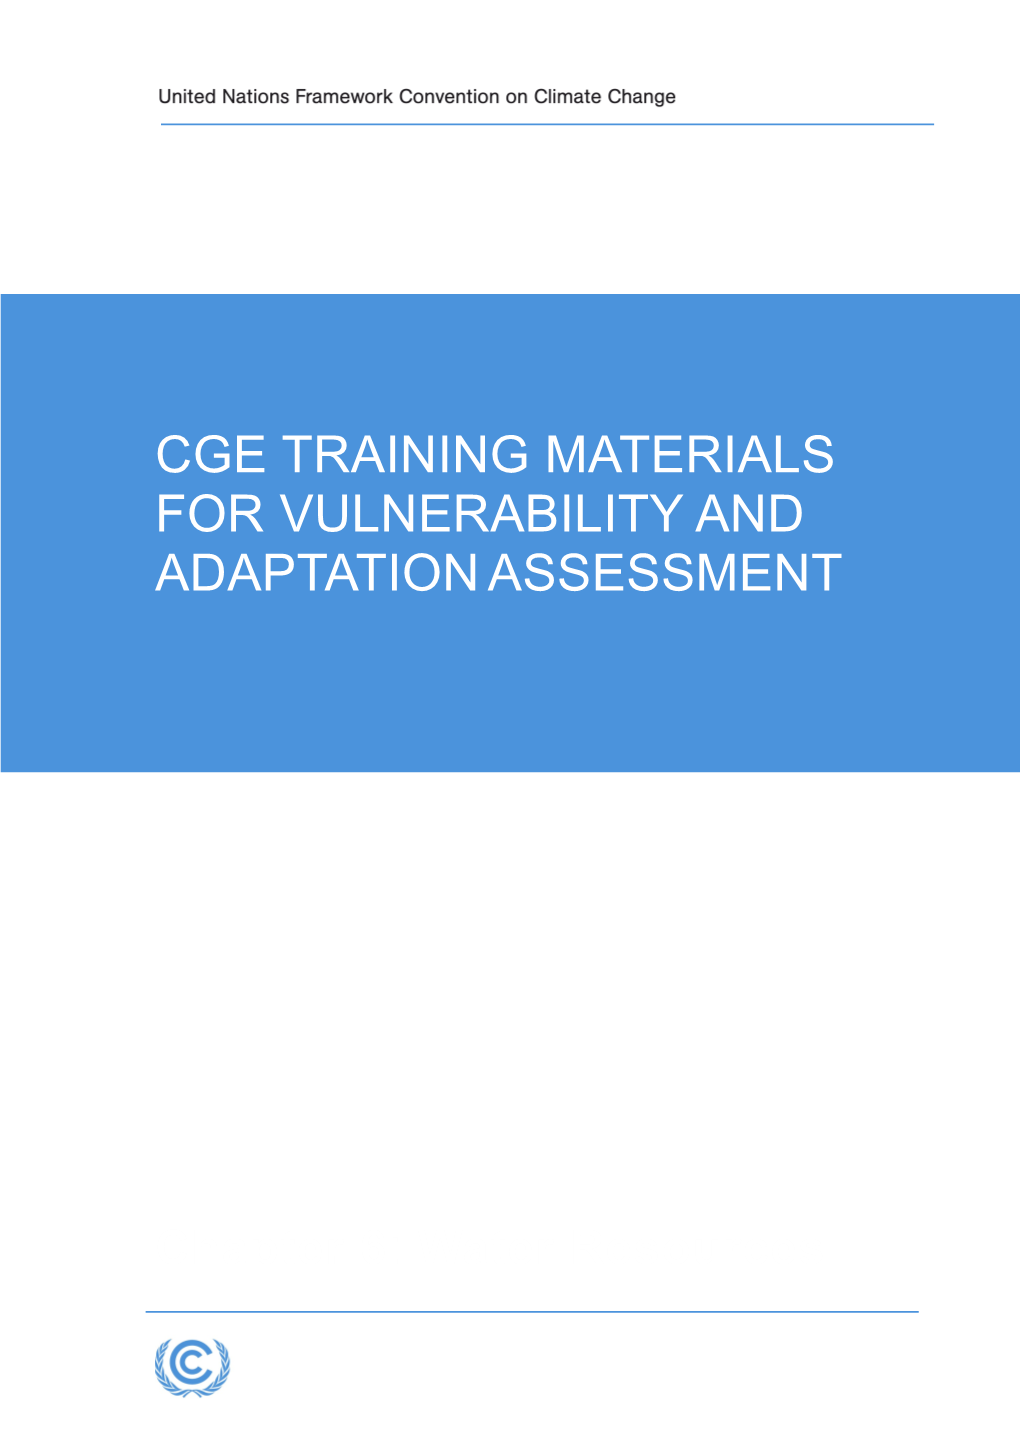 CGE Training Materials for Vulnerability and Adaptation Assessment s1